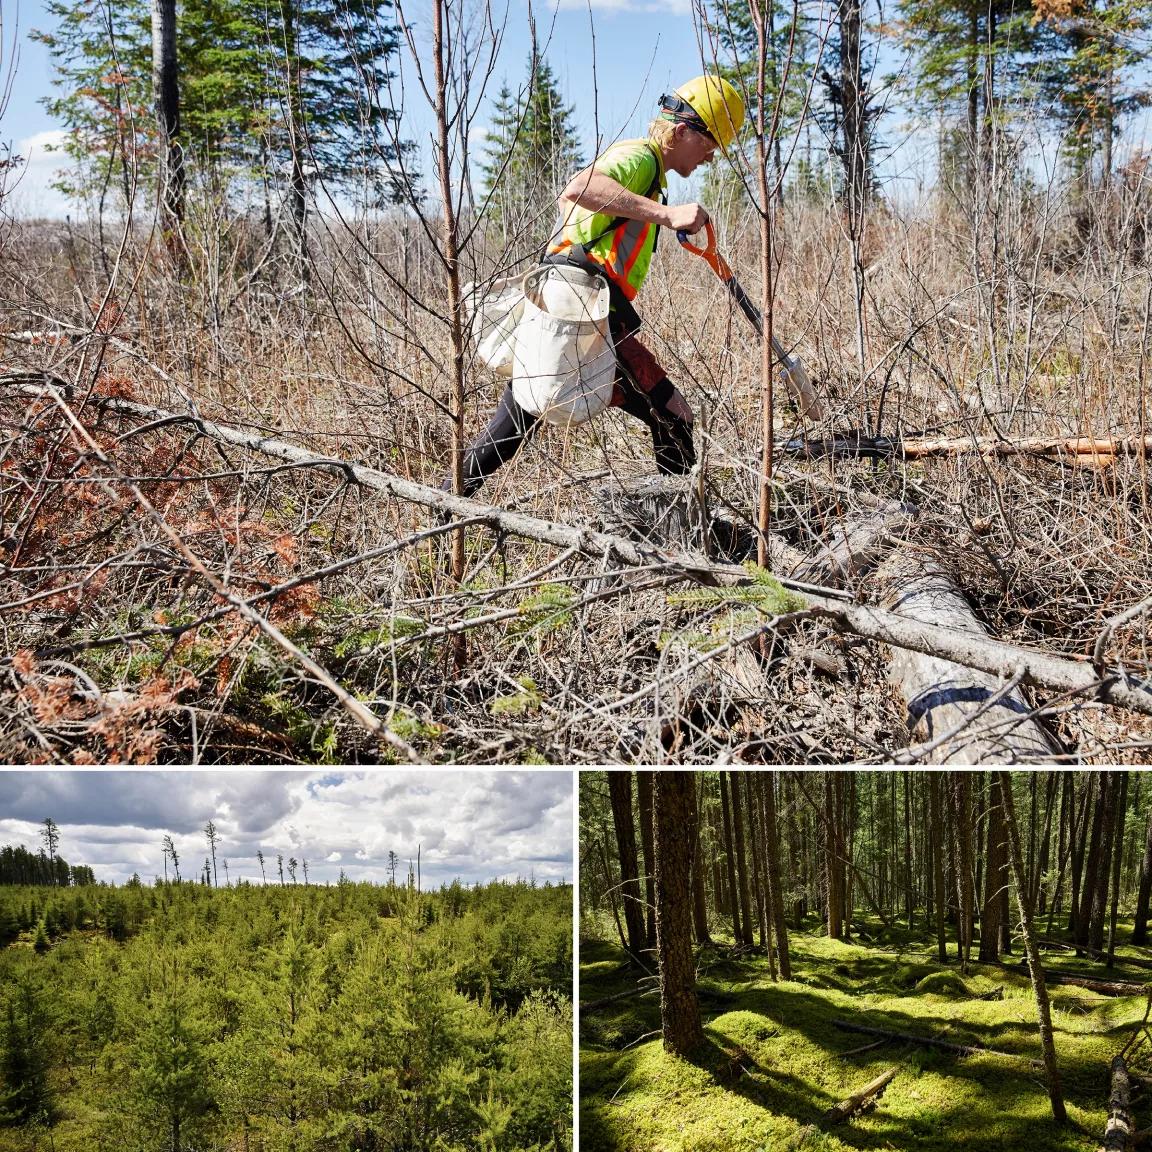 Top, a worker with a shovel walks through brish and branches; bottom left, a view of the forest canopy; bottom right, moss covers the forest floor